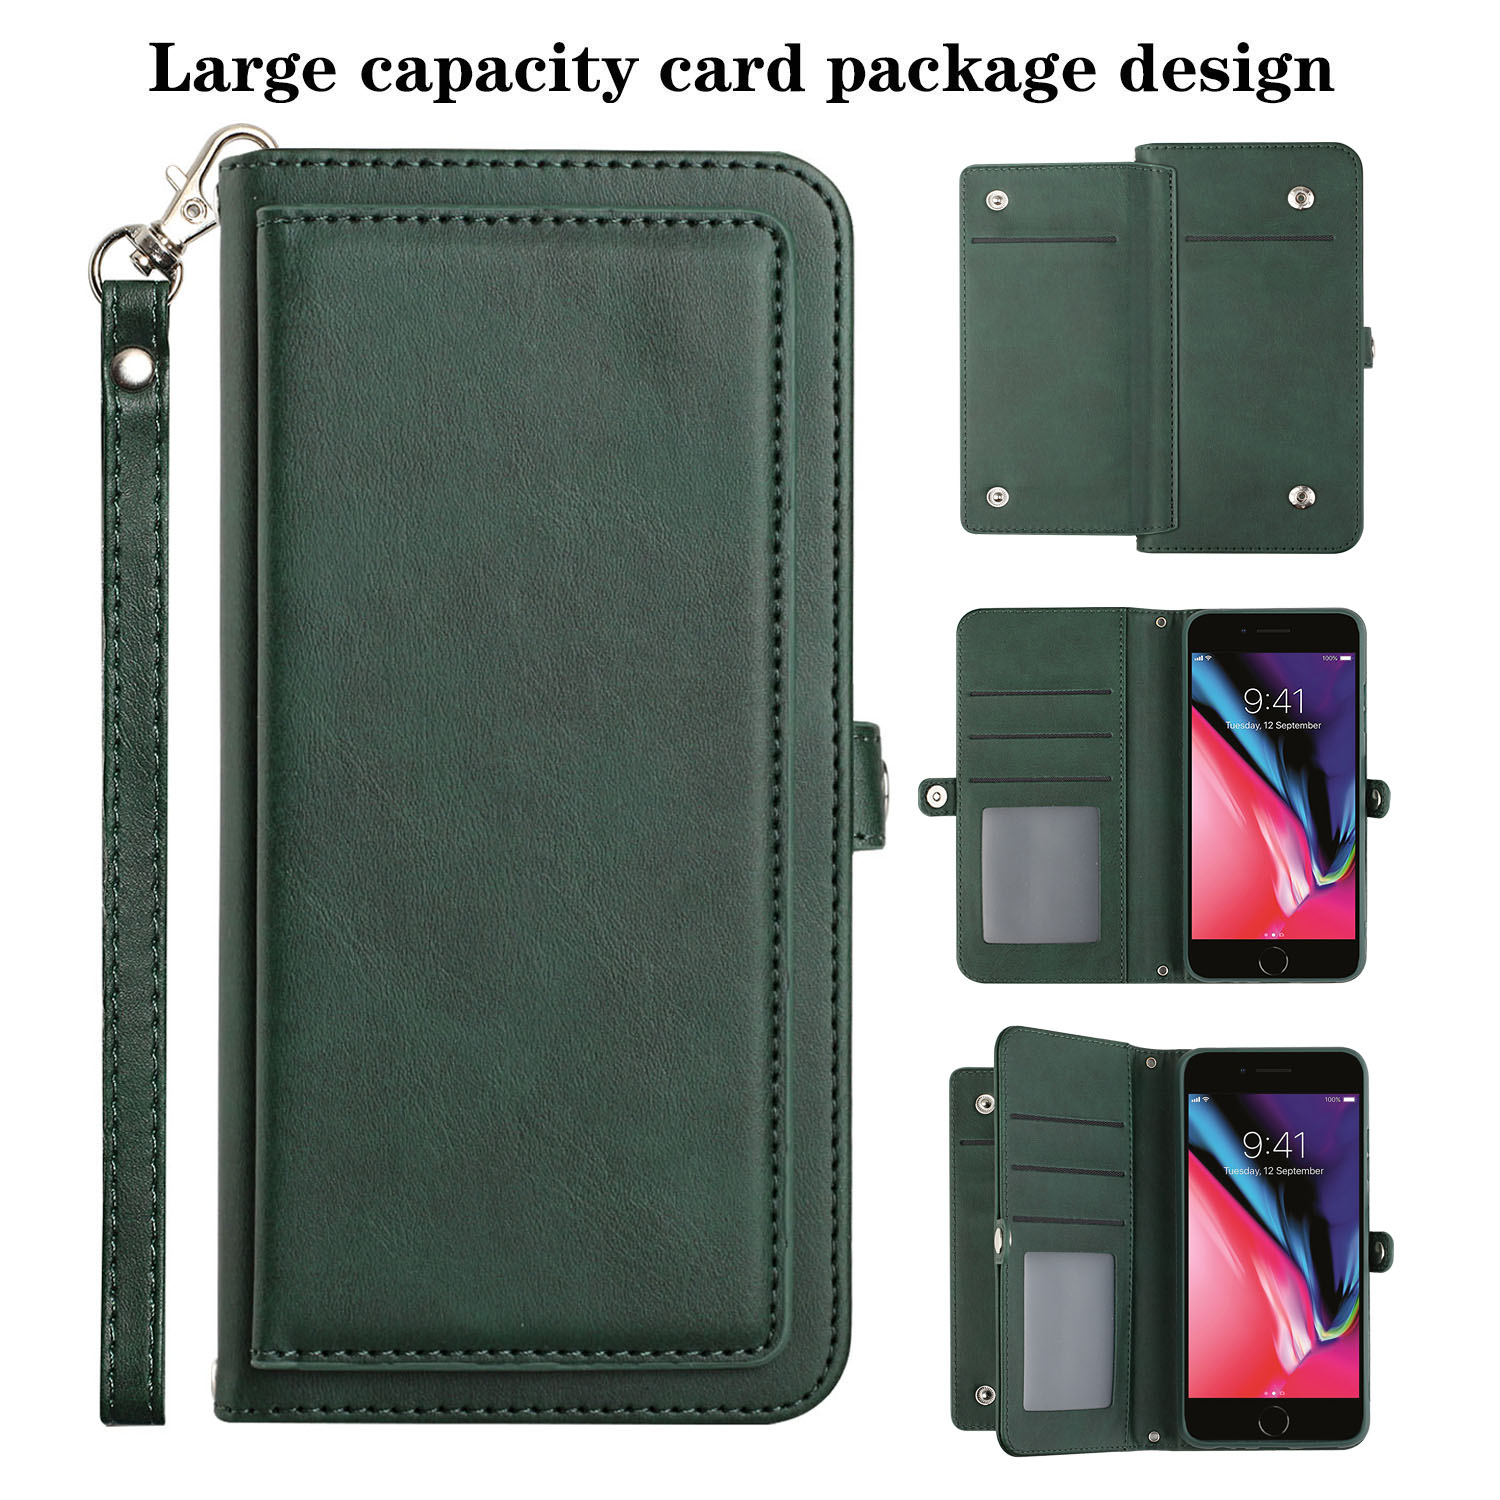 Premium PU Leather Folio WALLET Front Cover Case with Card Holder Slots and Wrist Strap for Apple